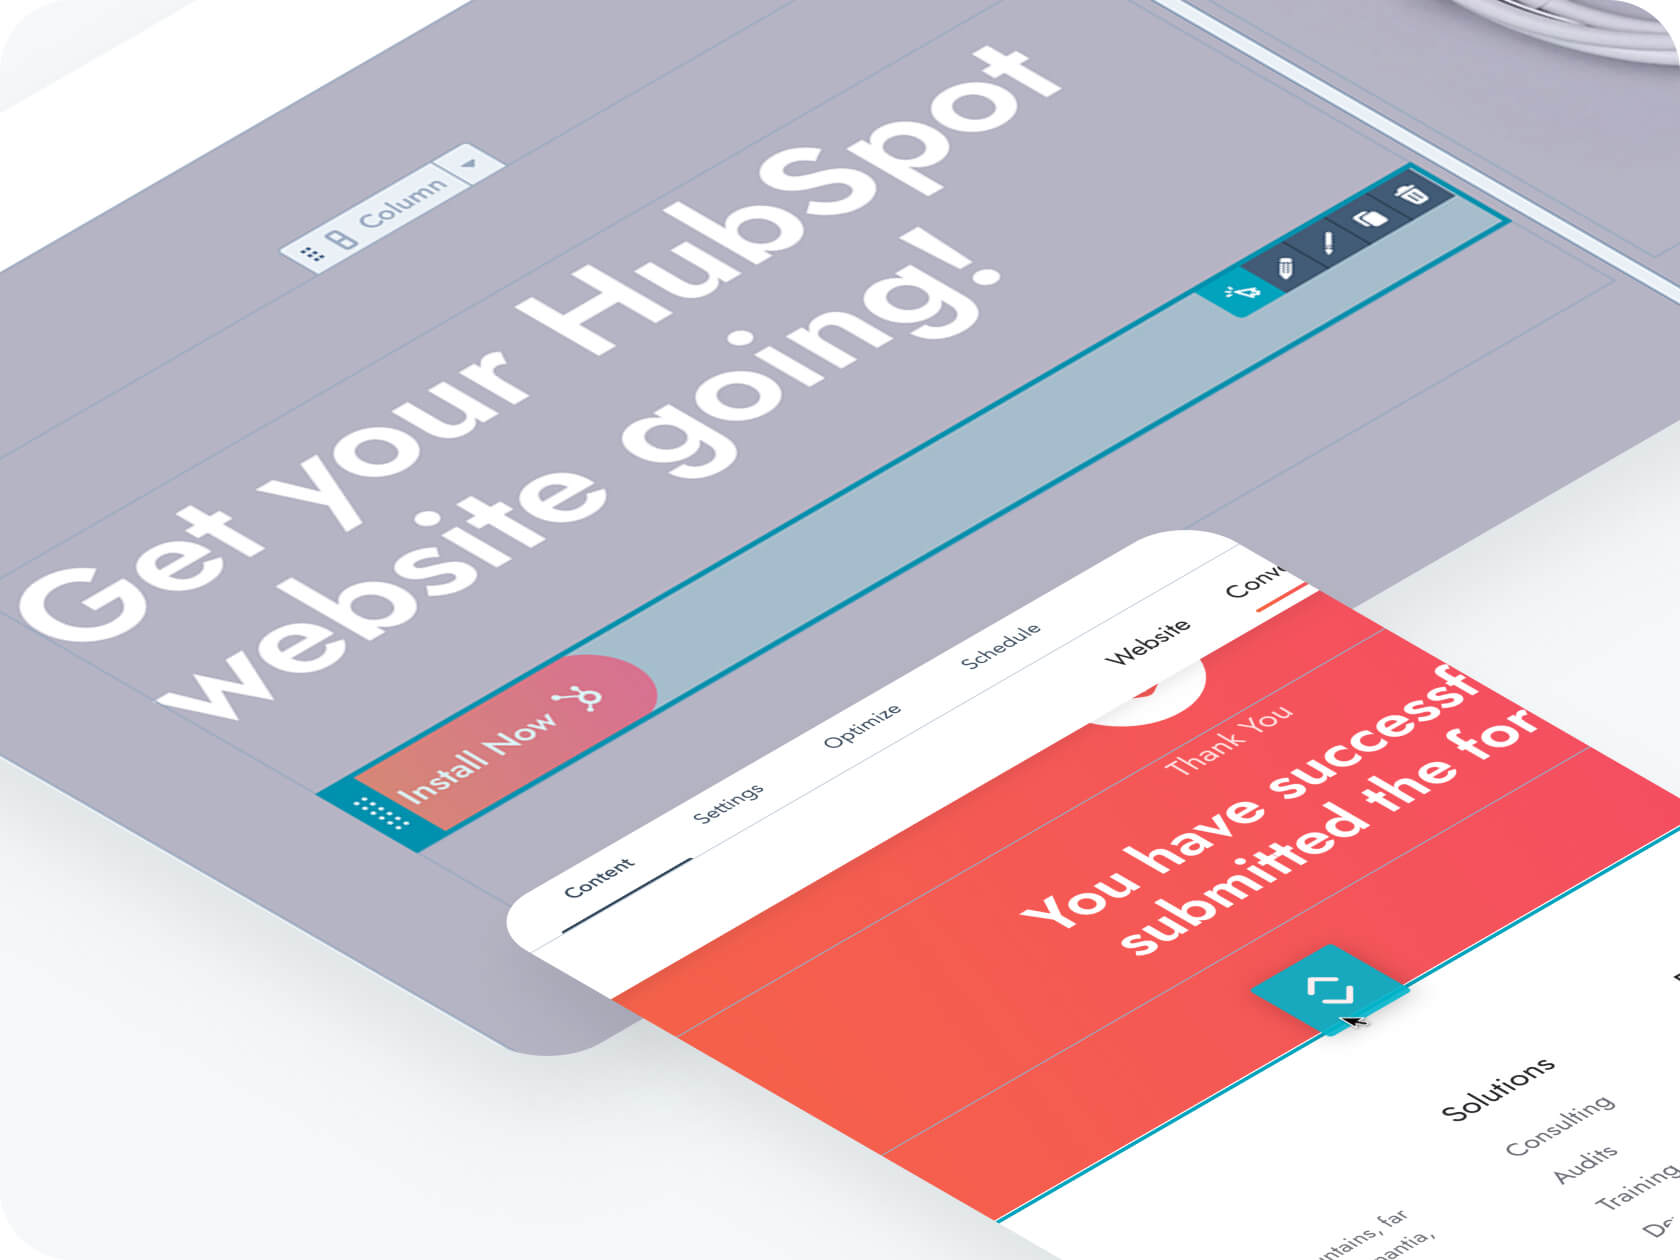 Act3 HubSpot theme - Drag and drop page editor